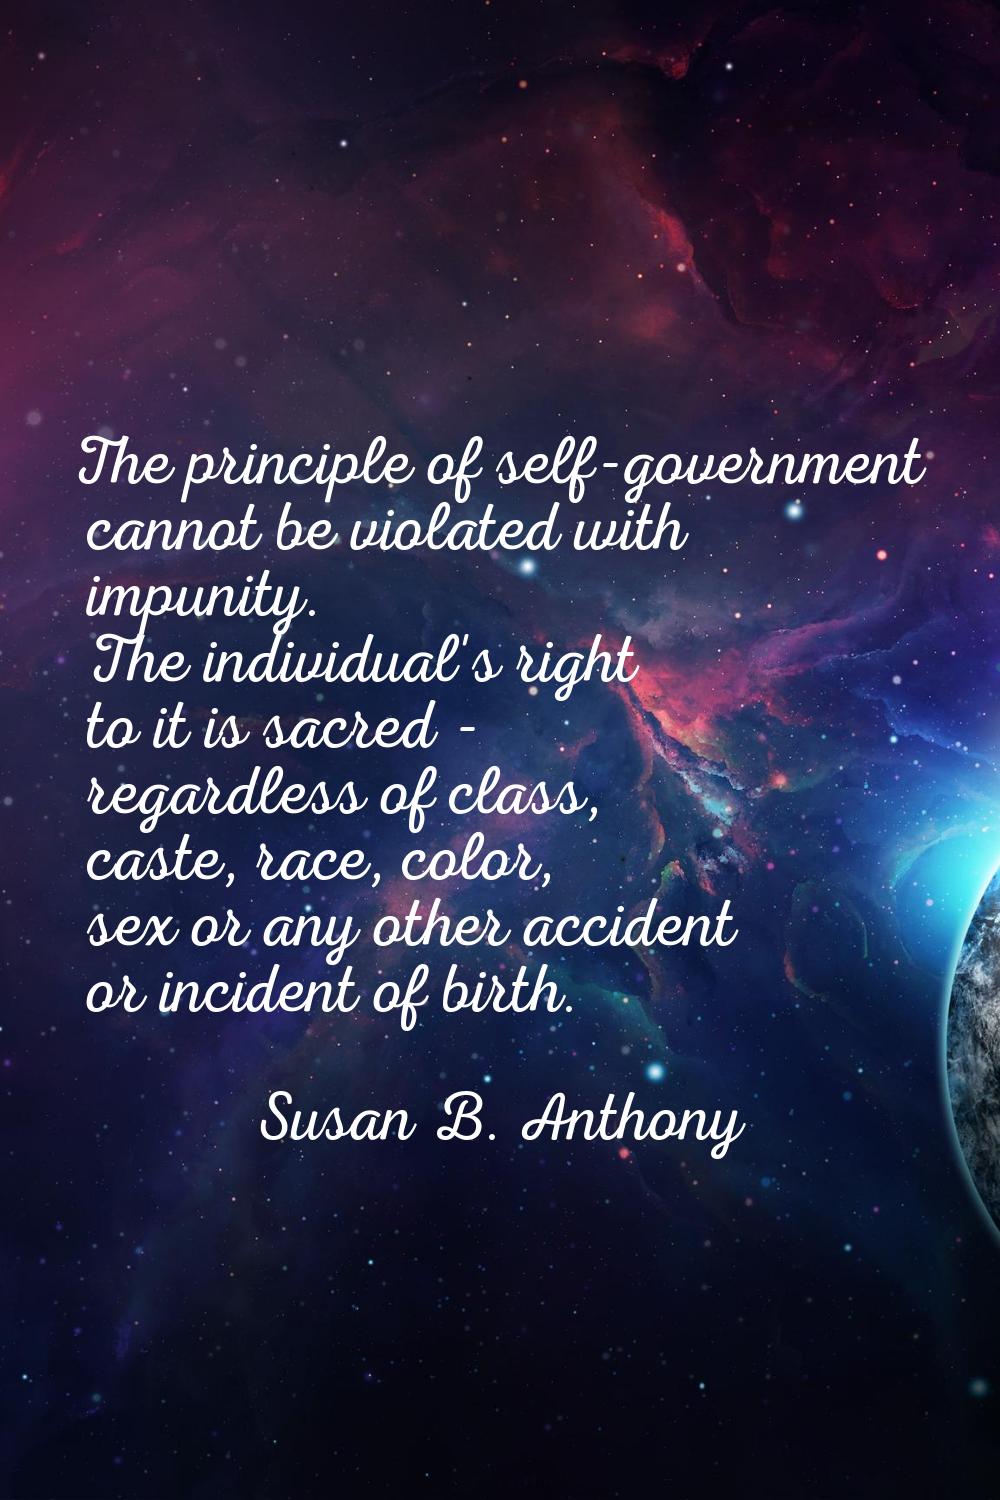 The principle of self-government cannot be violated with impunity. The individual's right to it is 